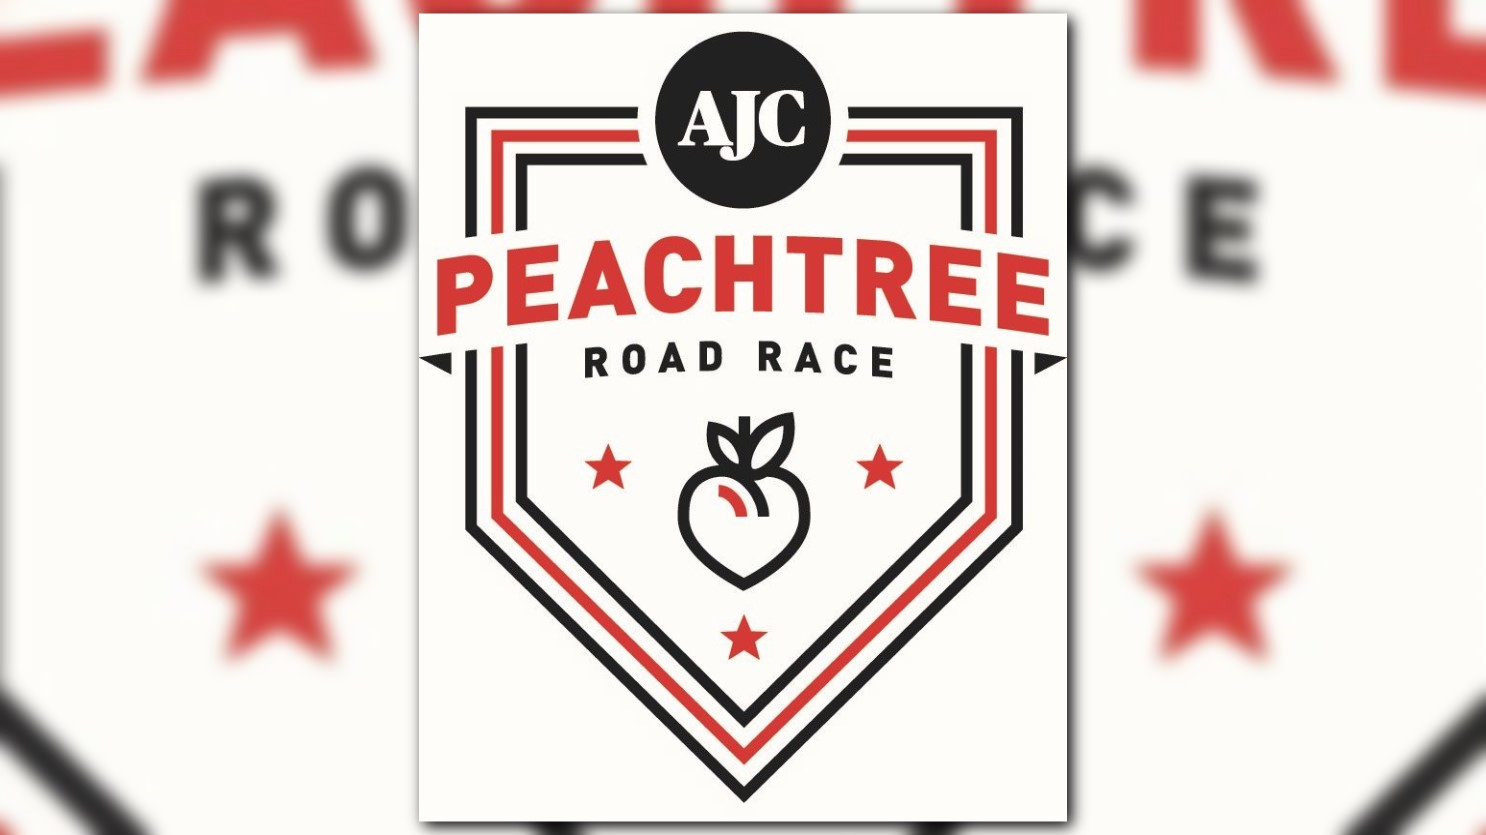 49th AJC Peachtree Road Race It's time to sign up for the world's